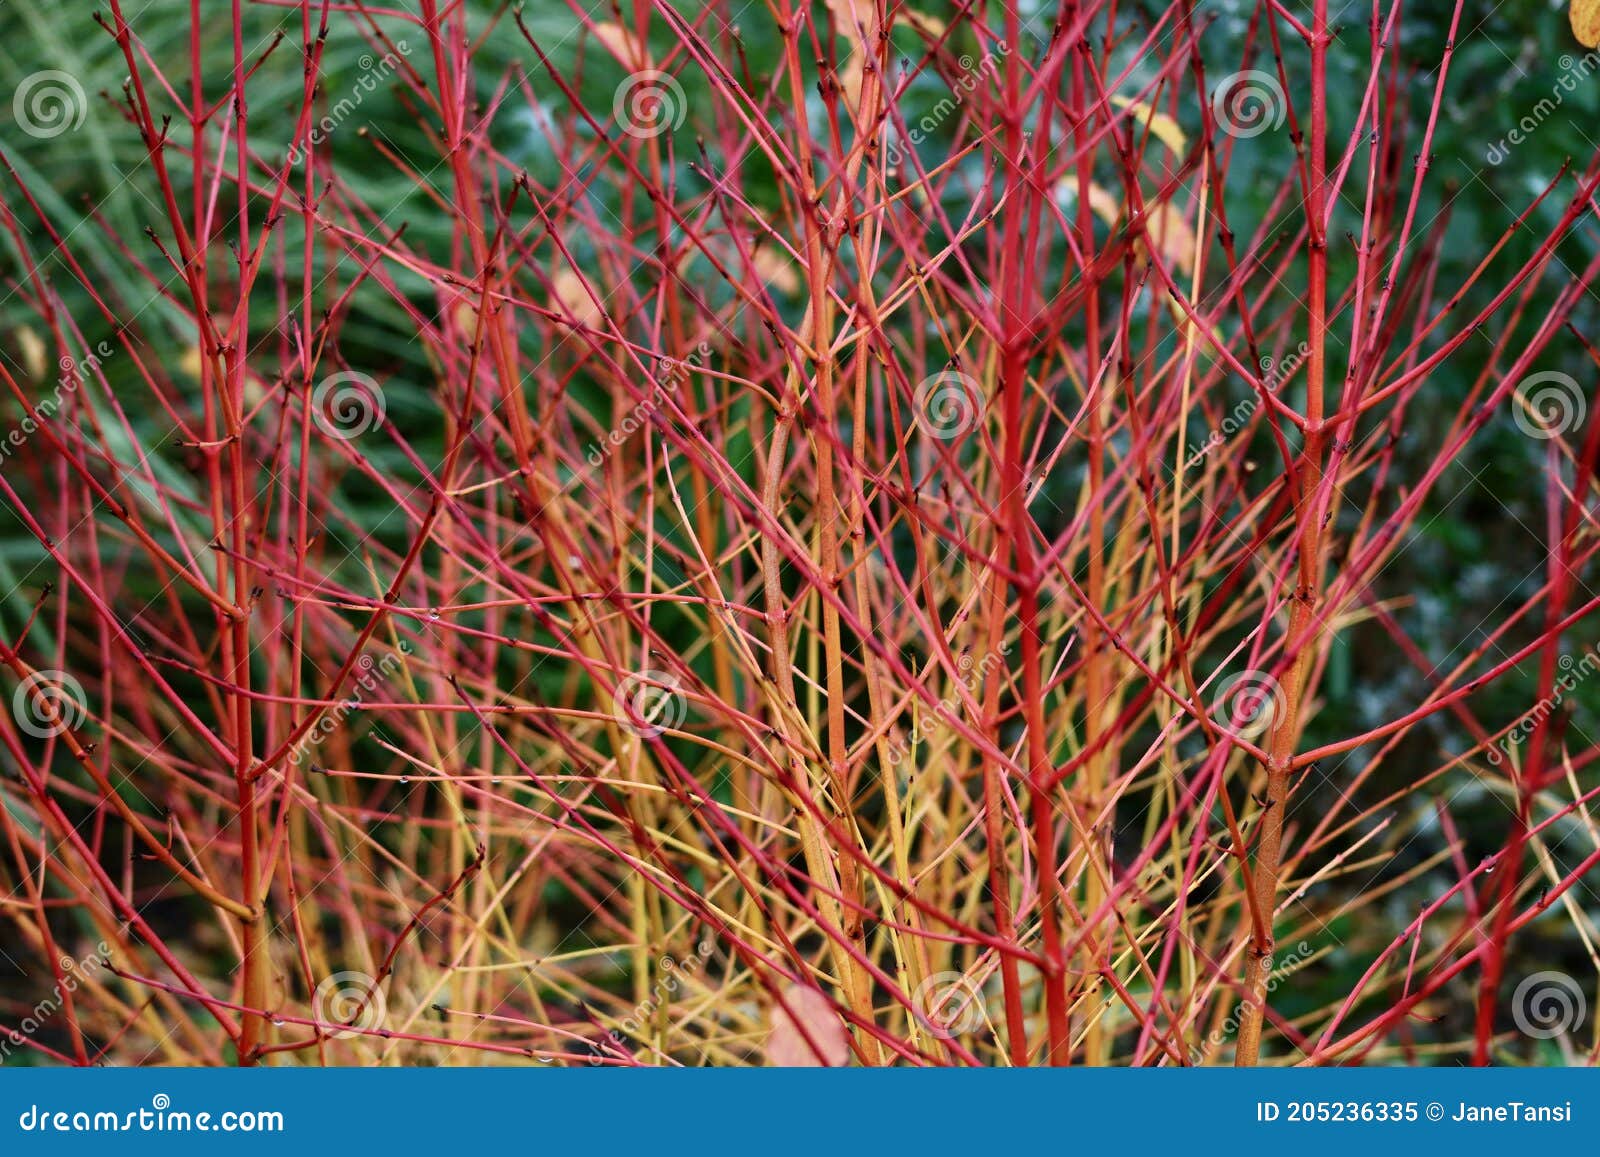 architectural corpus shrub with red and orange stems without foliage in winter